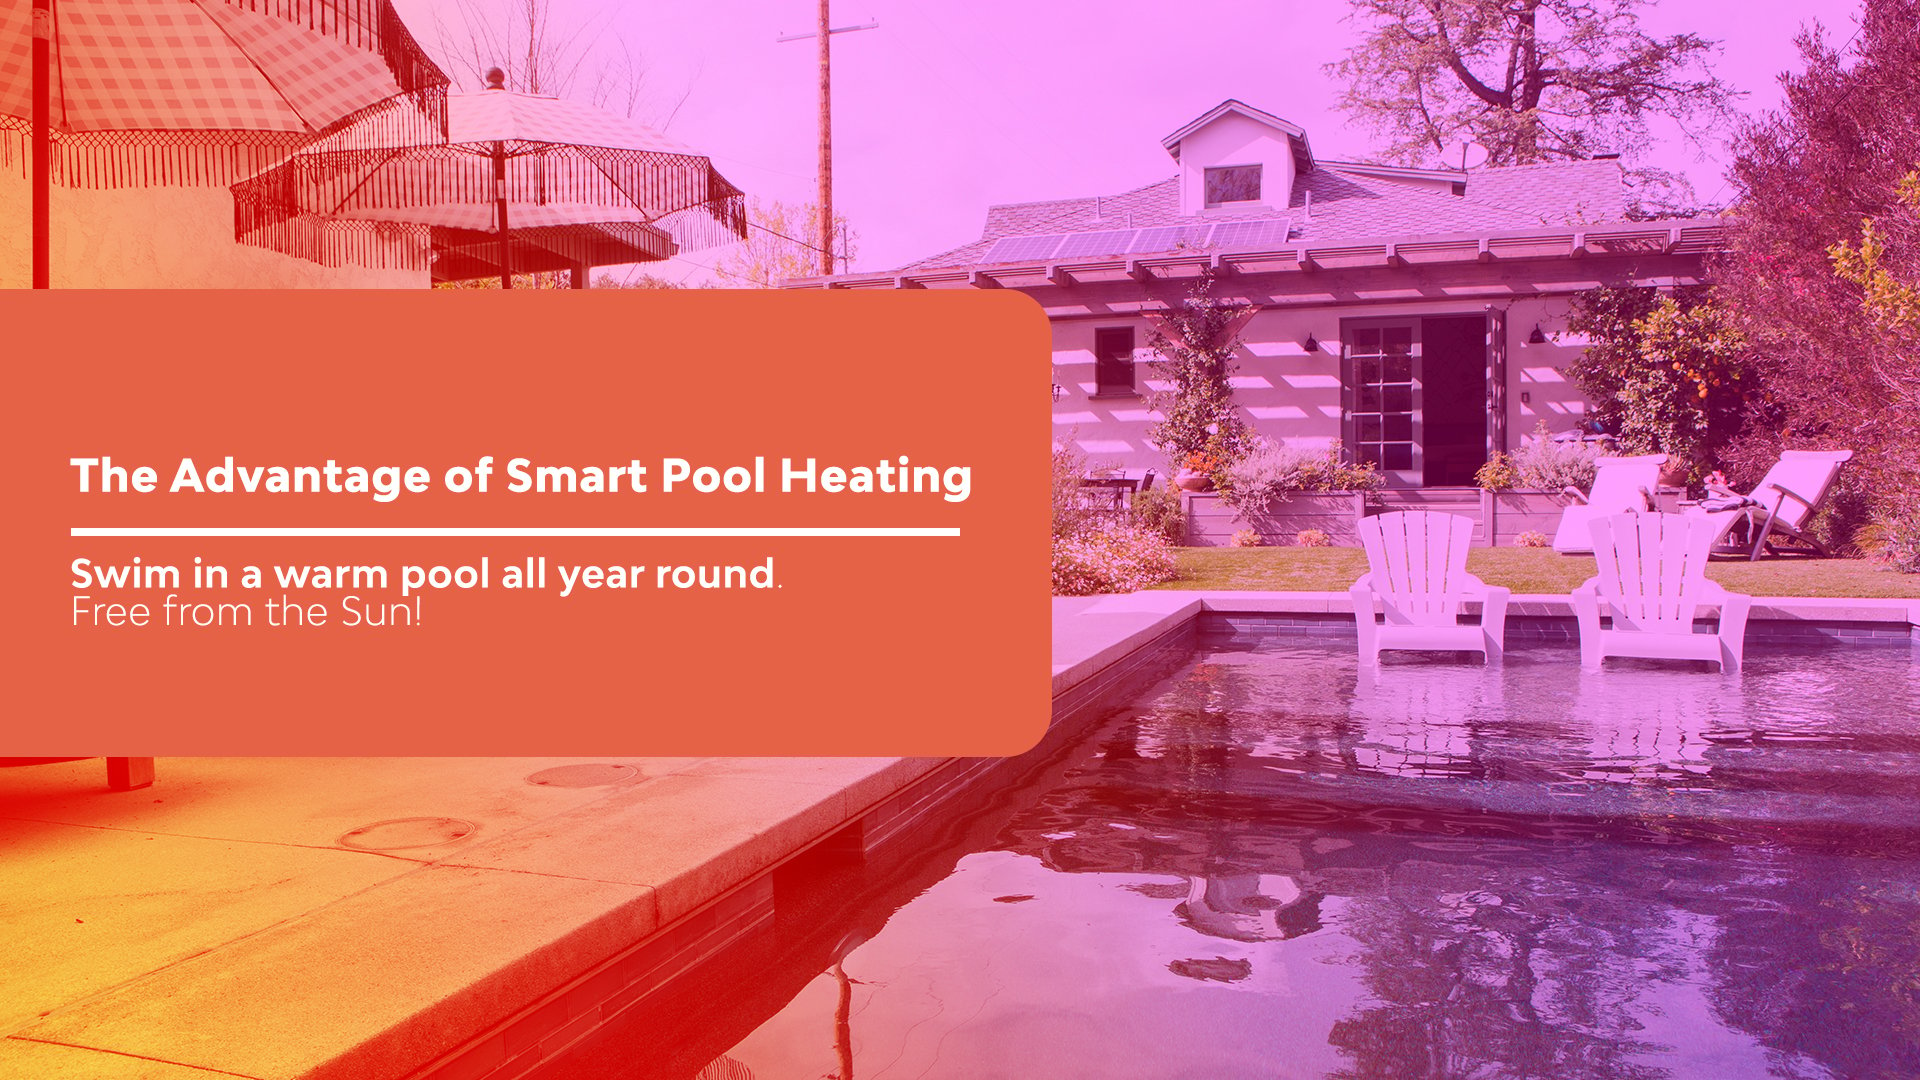 The advantage of Smart Pool Heating: Swim in a warm pool all year round. Free from the Sun! - featured image